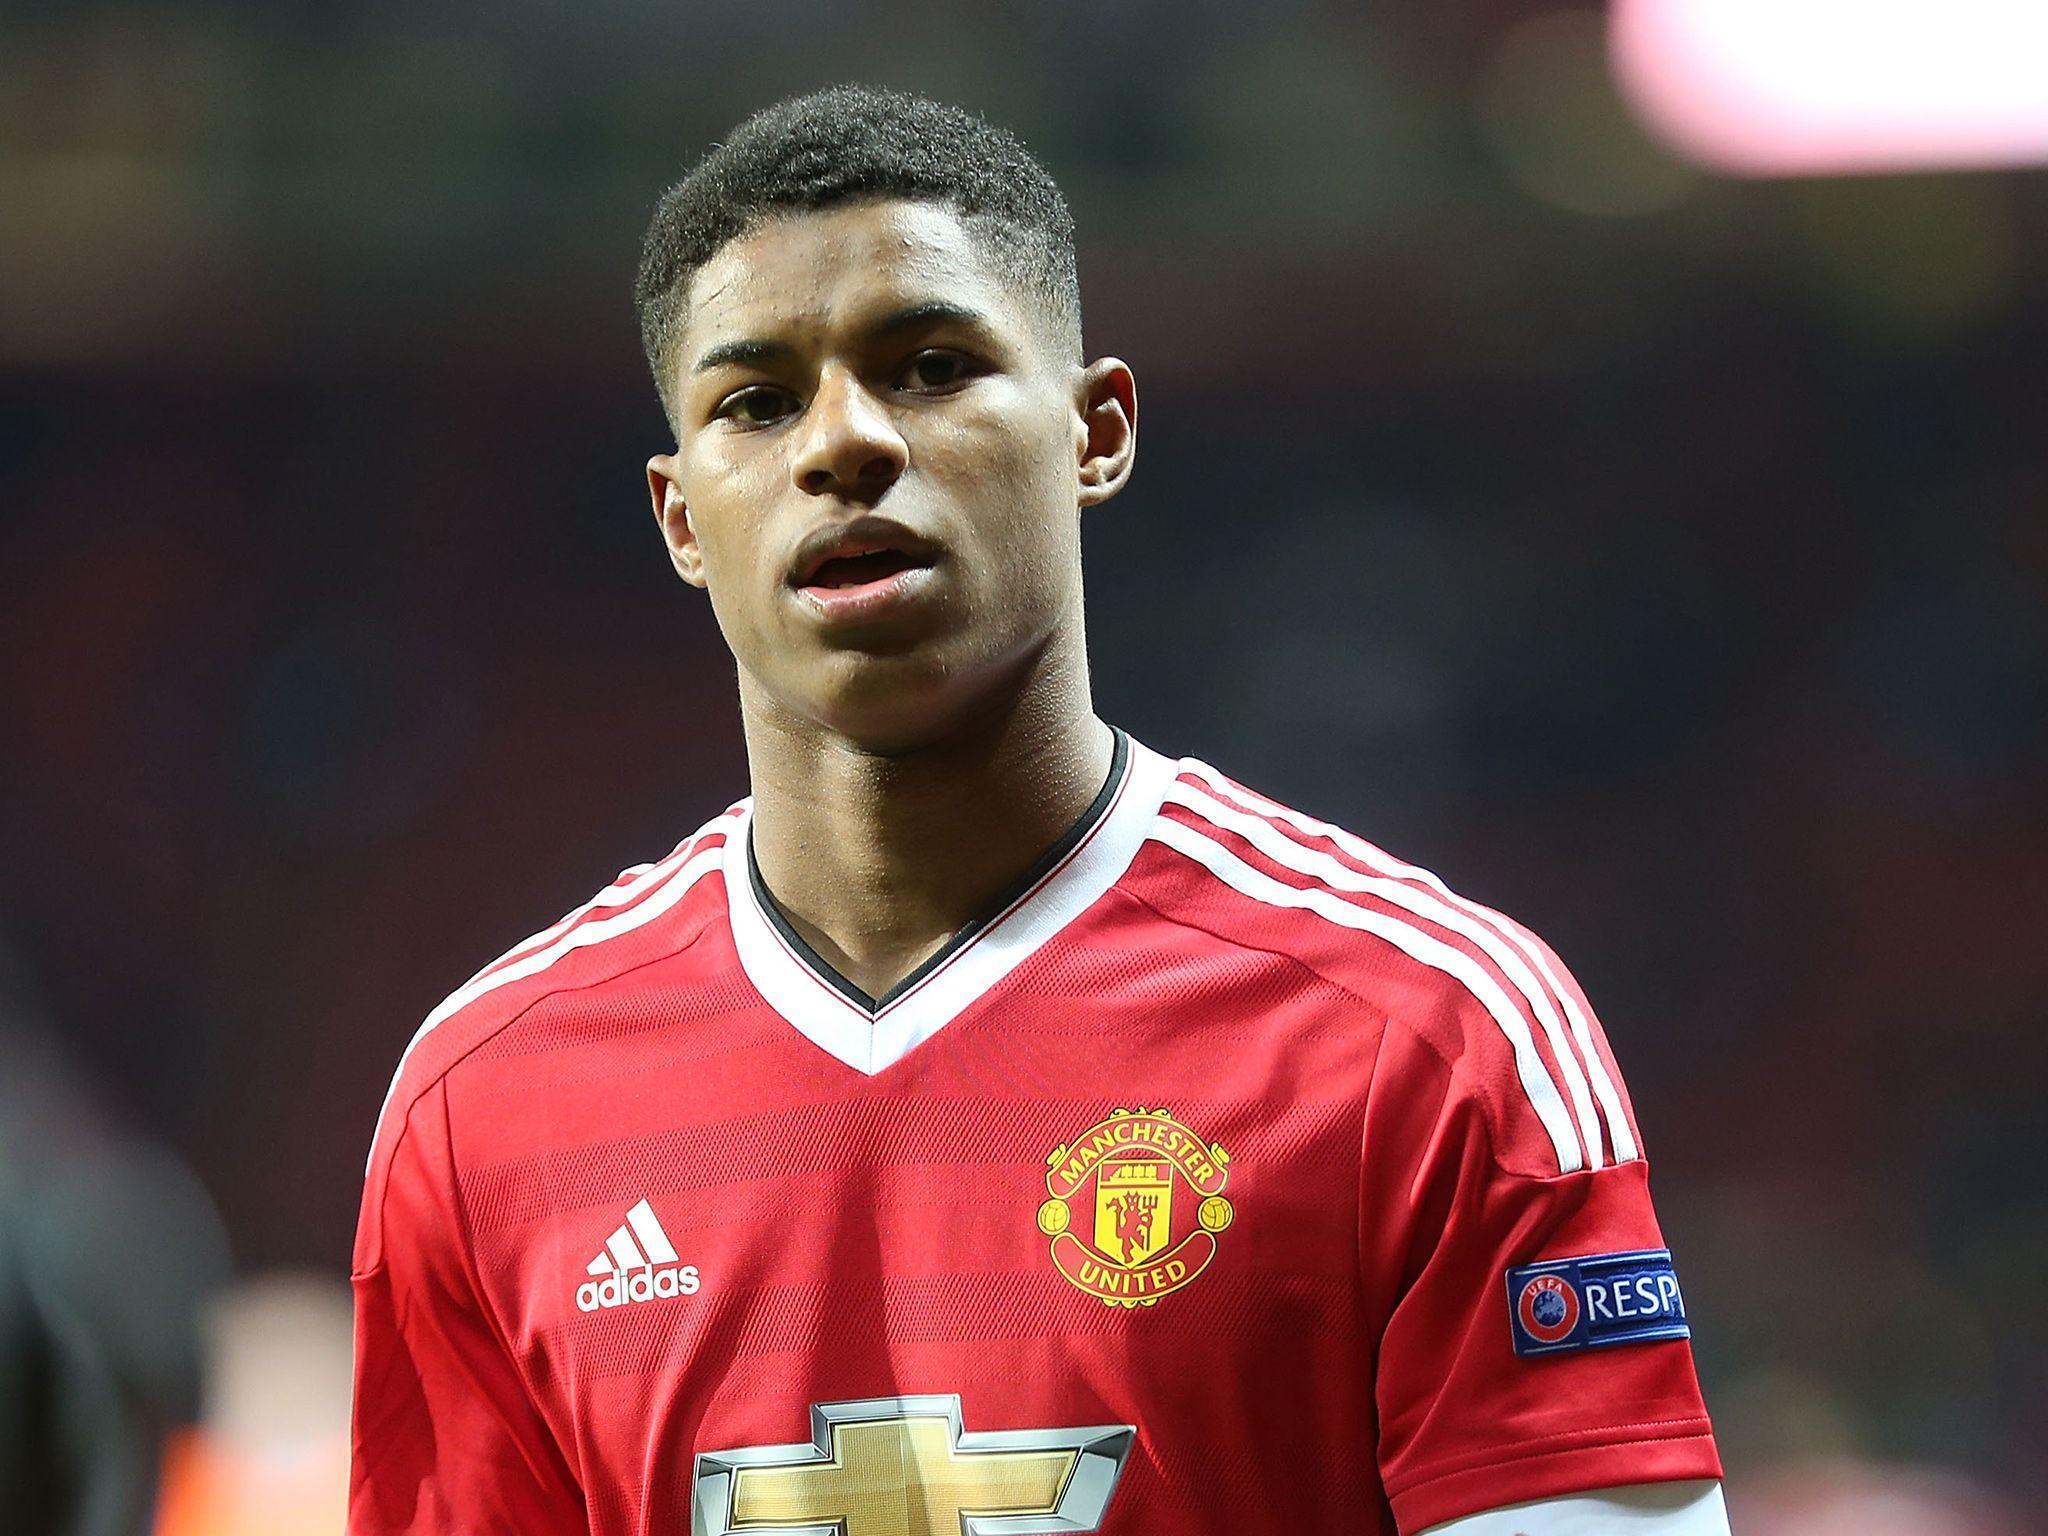 Marcus Rashford: Who is Manchester United's exciting young striker